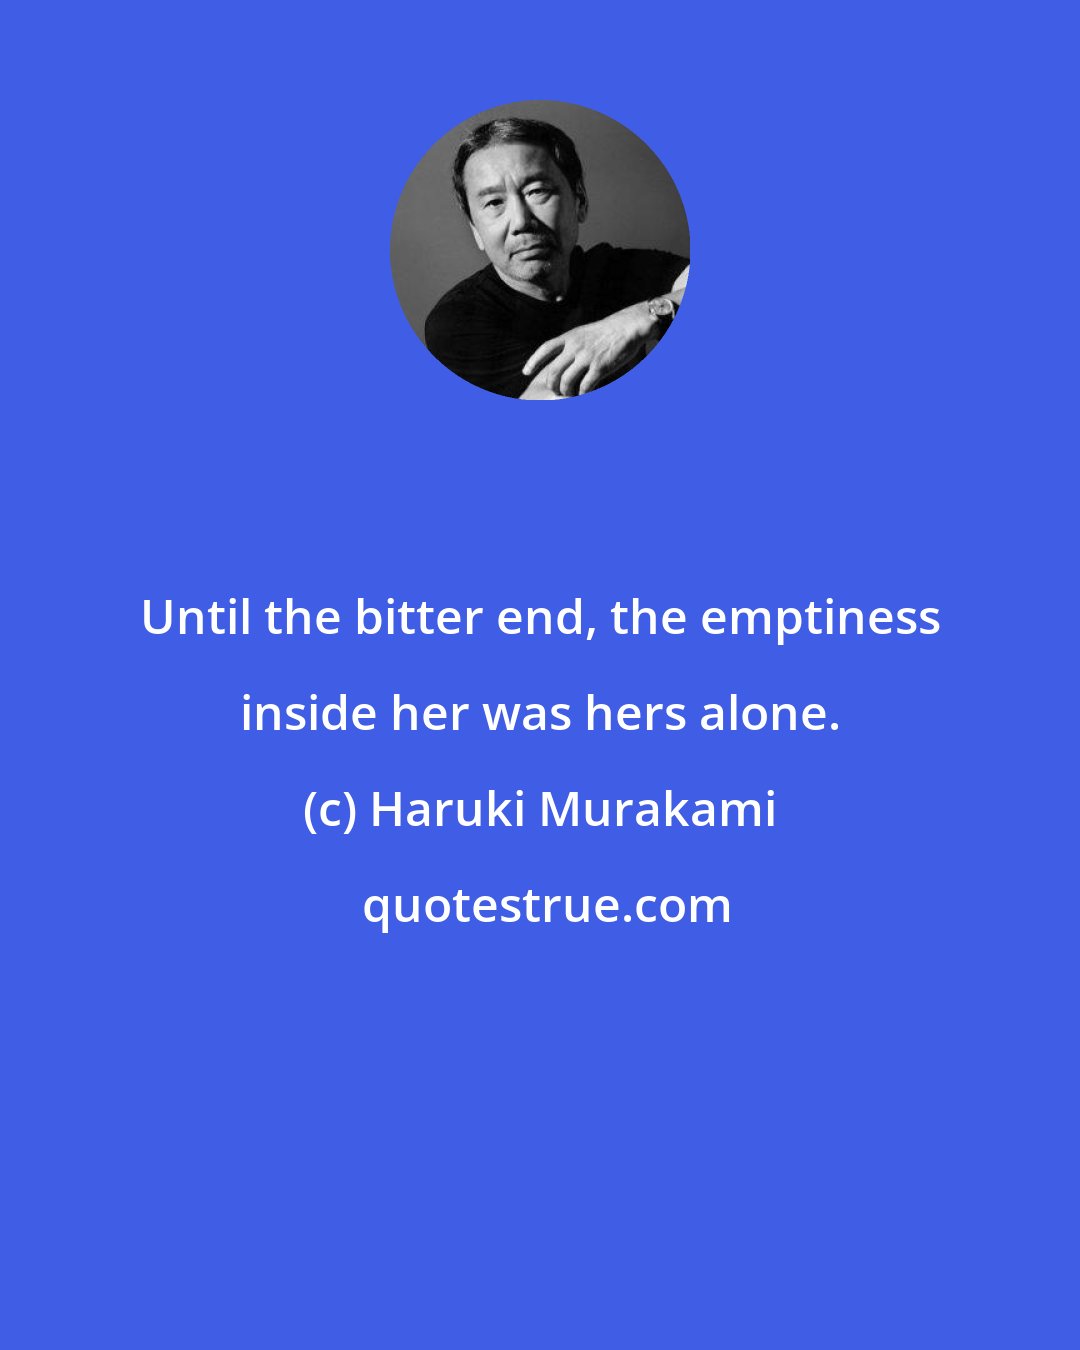 Haruki Murakami: Until the bitter end, the emptiness inside her was hers alone.